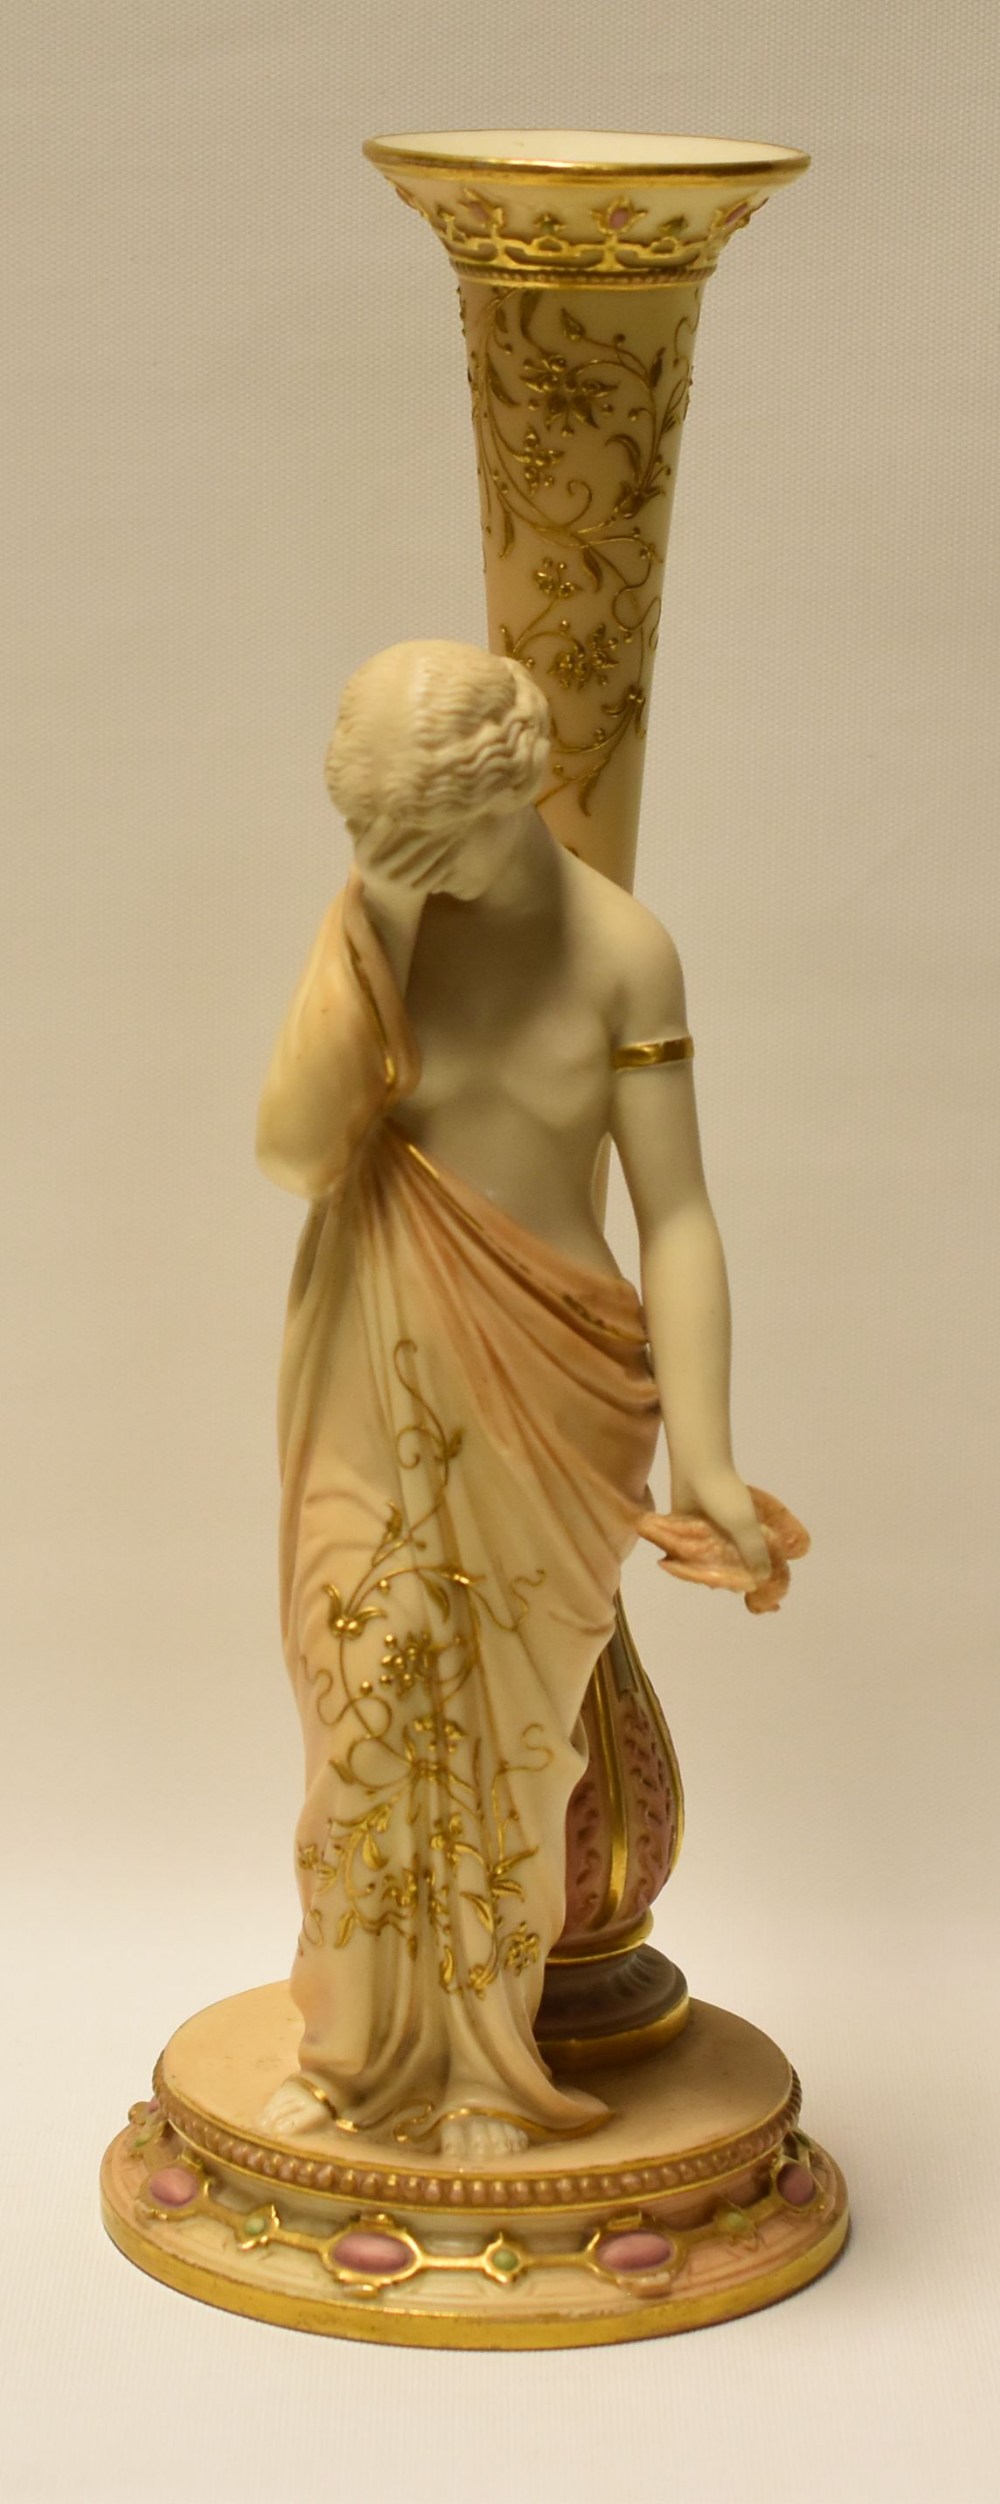 A ROYAL WORCESTER FIGURAL VASE in the Classical style with sorrowful robed lady holding a dead